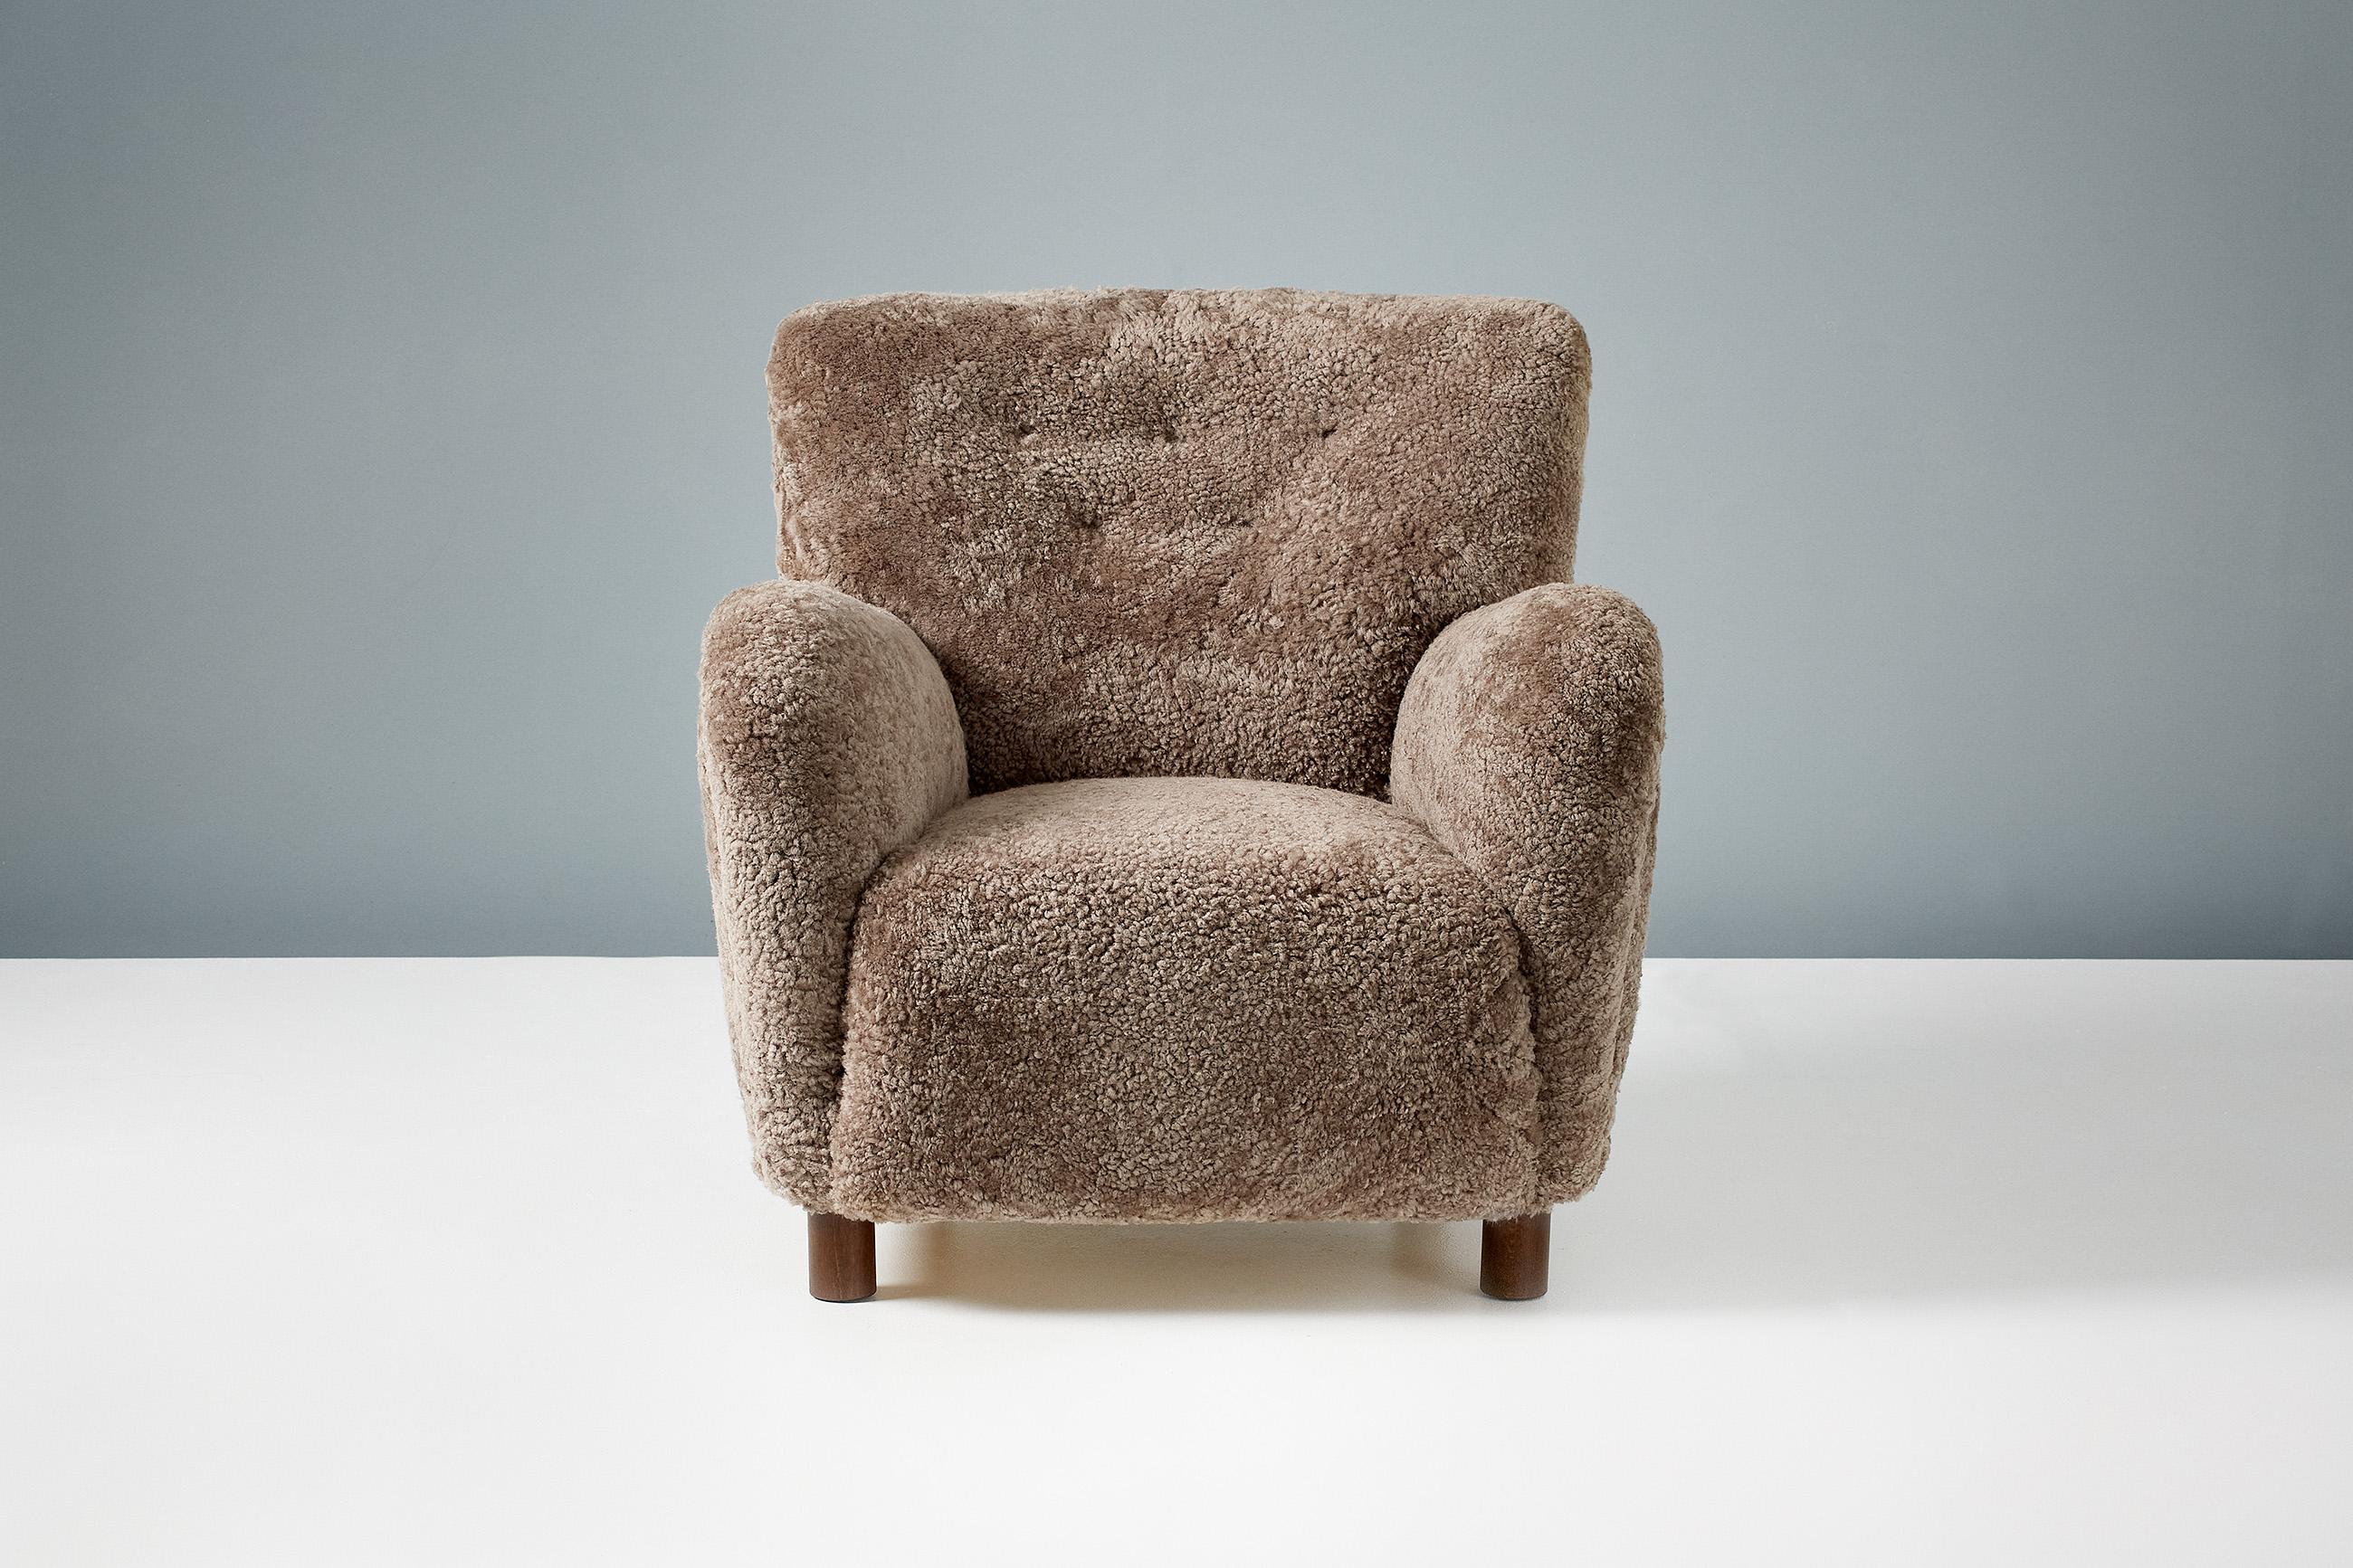 Dagmar - Model 54 Lounge Chair in COM Fabric

A pair of custom made lounge chairs developed and hand-made at our workshops in London using the highest quality materials.

This listing is for a pair to be upholstered in client supplied fabric.